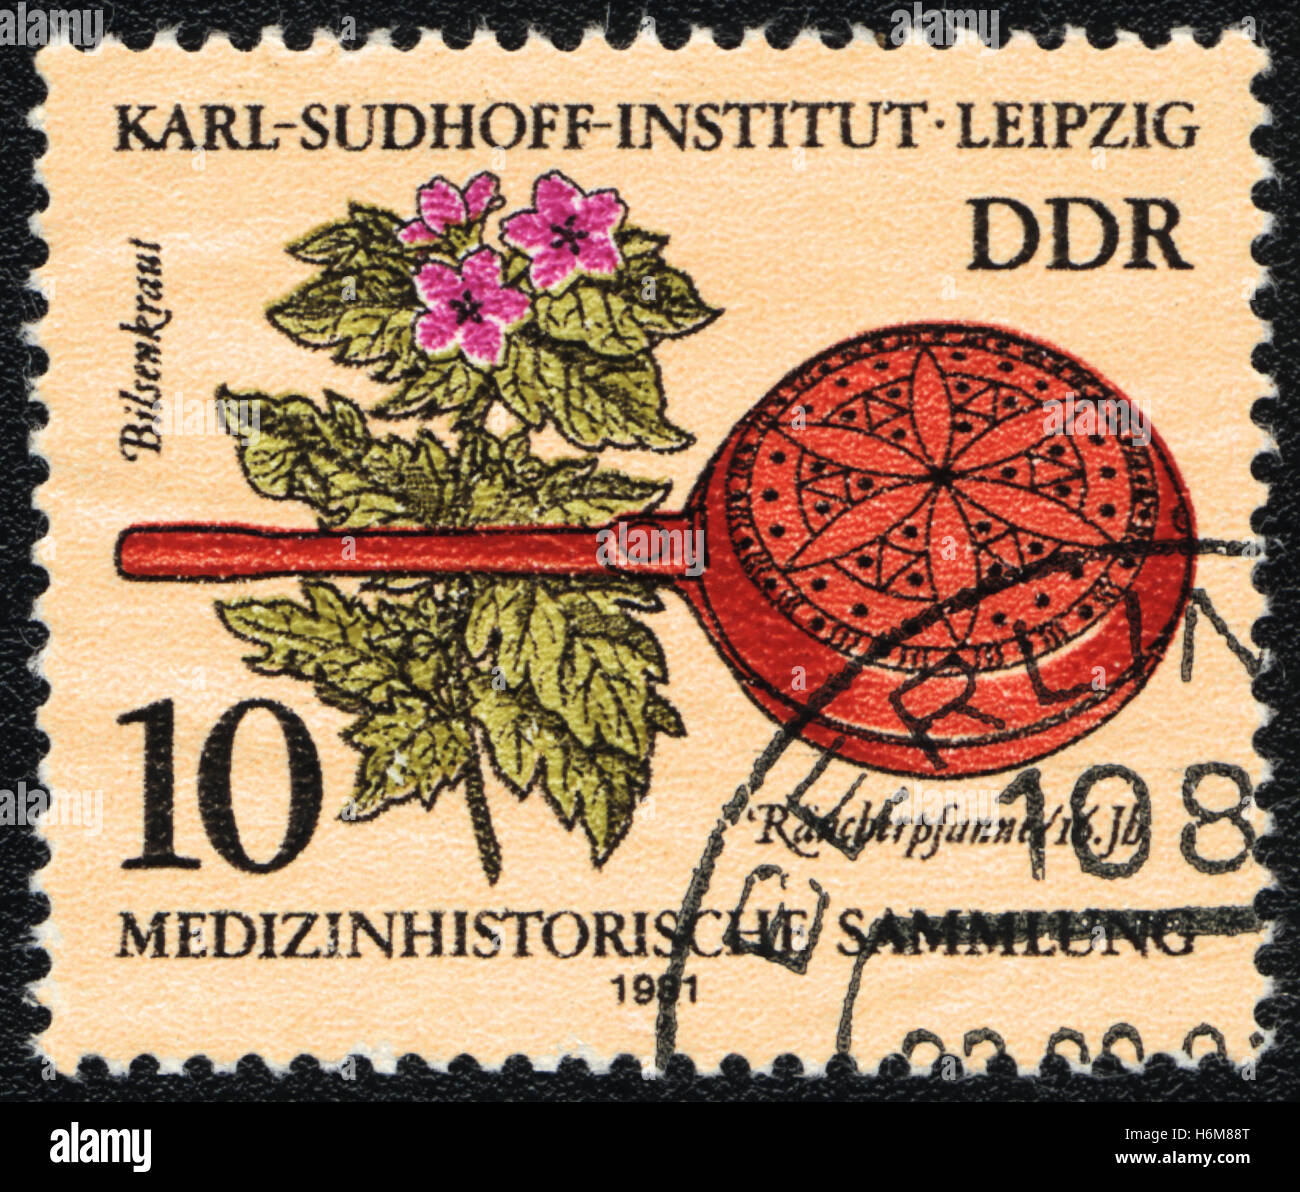 A postage stamp printed in DDR  Germany shows Henbane and  Historic medical instrument, Karl- Sudhoff-Institute, Leipzig, 1981 Stock Photo